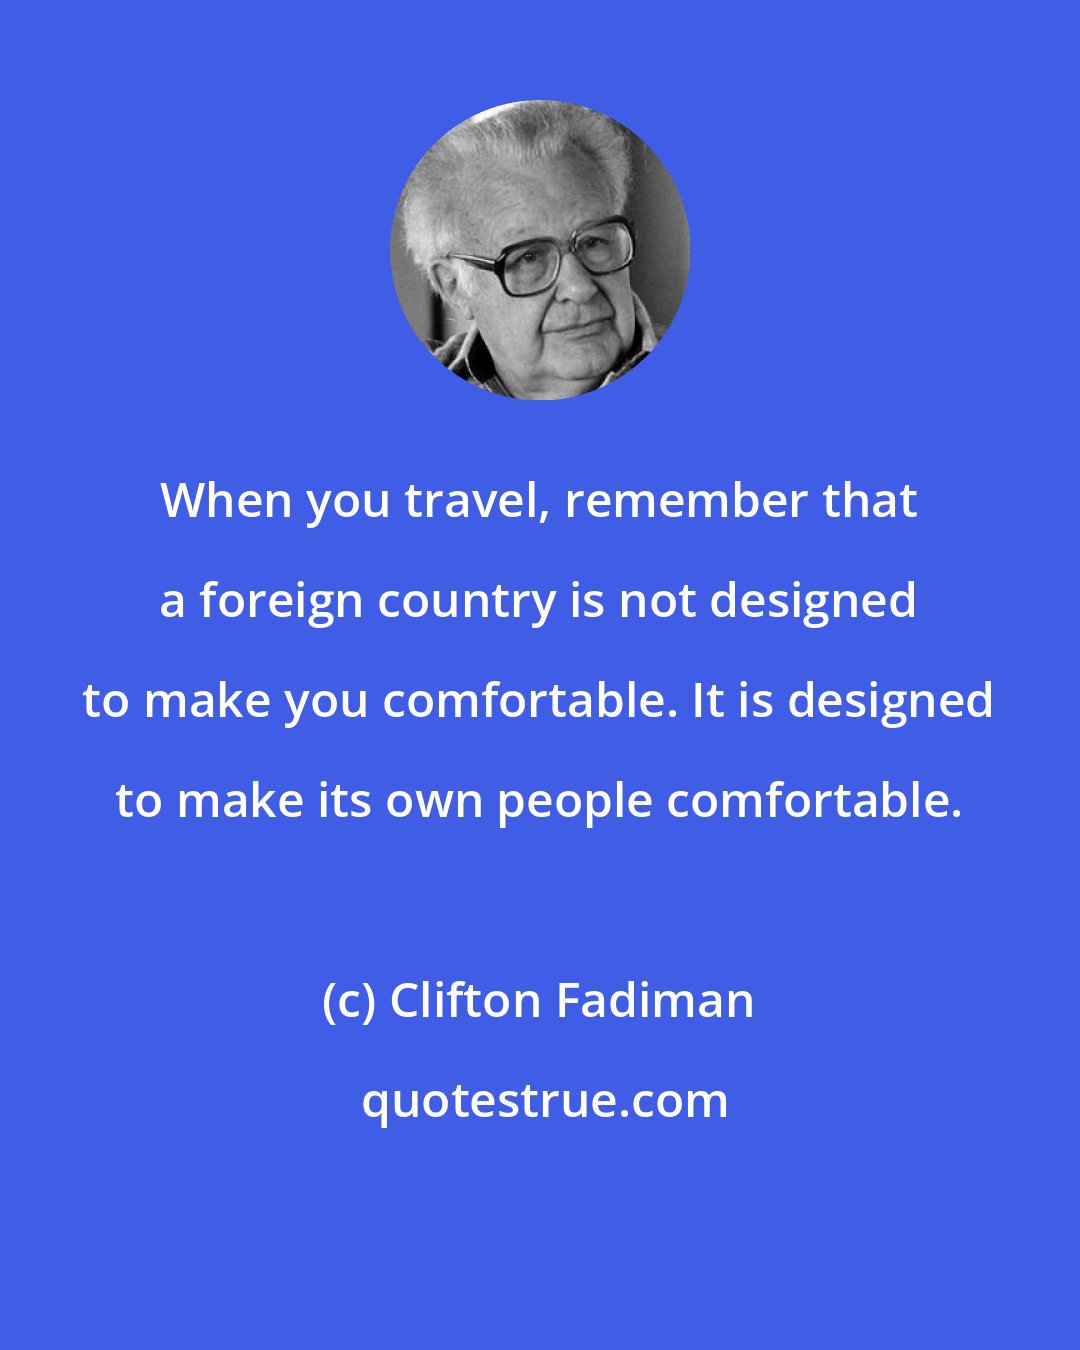 Clifton Fadiman: When you travel, remember that a foreign country is not designed to make you comfortable. It is designed to make its own people comfortable.